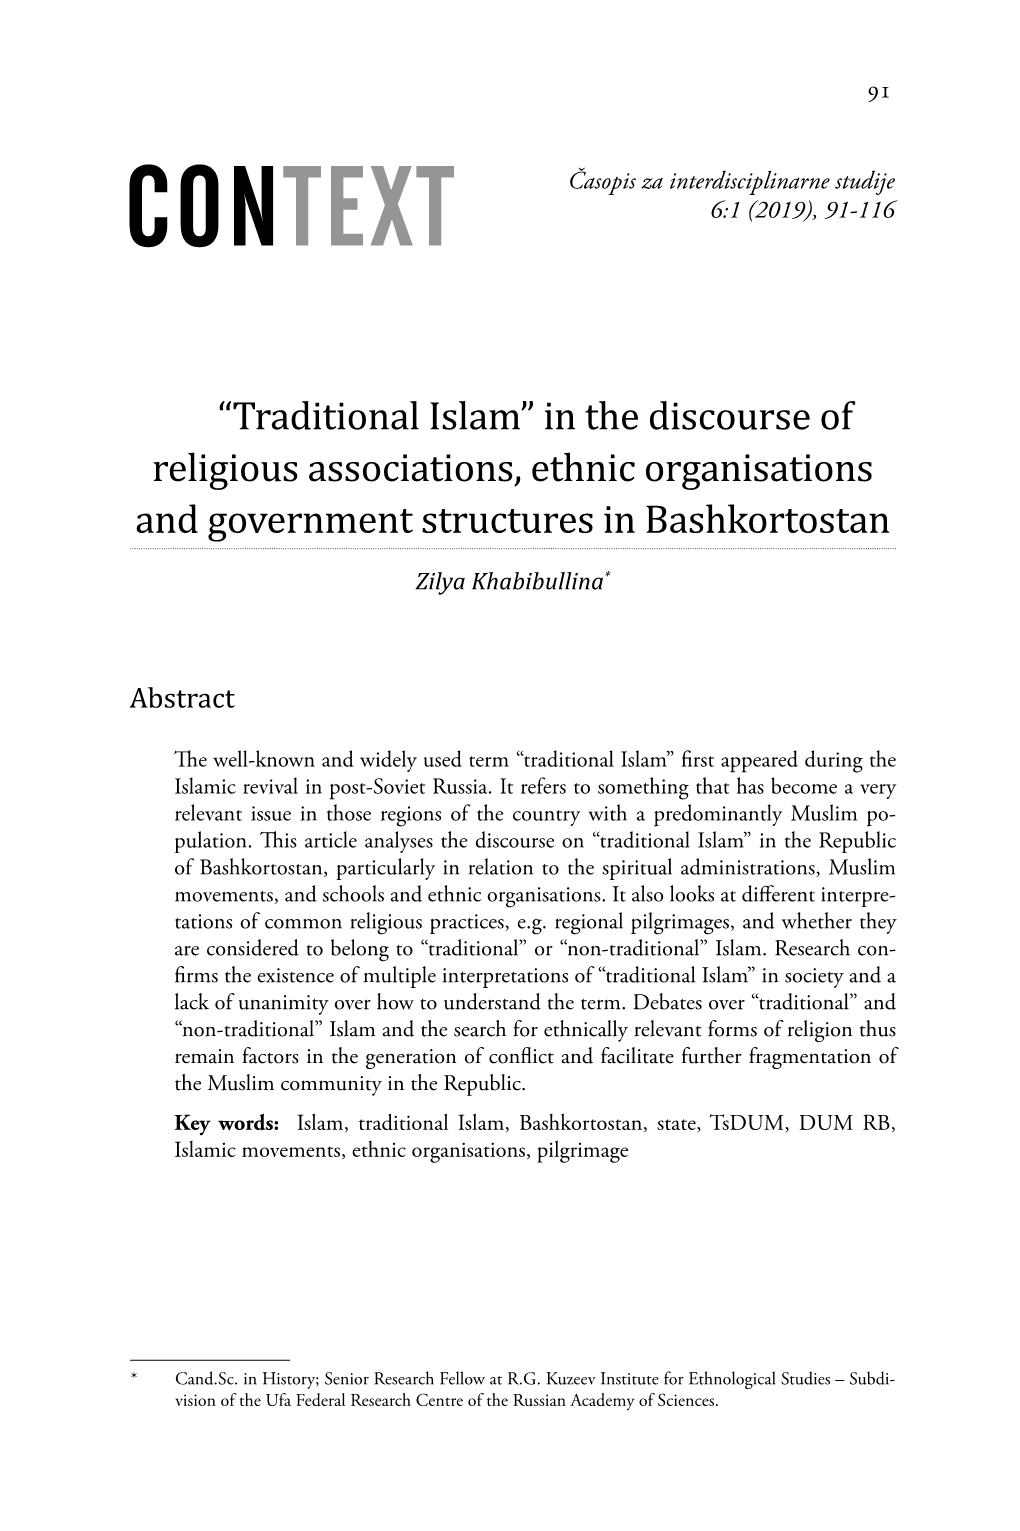 “Traditional Islam” in the Discourse of Religious Associations, Ethnic Organisations Zilya Khabibullina* and Government Structures in Bashkortostan